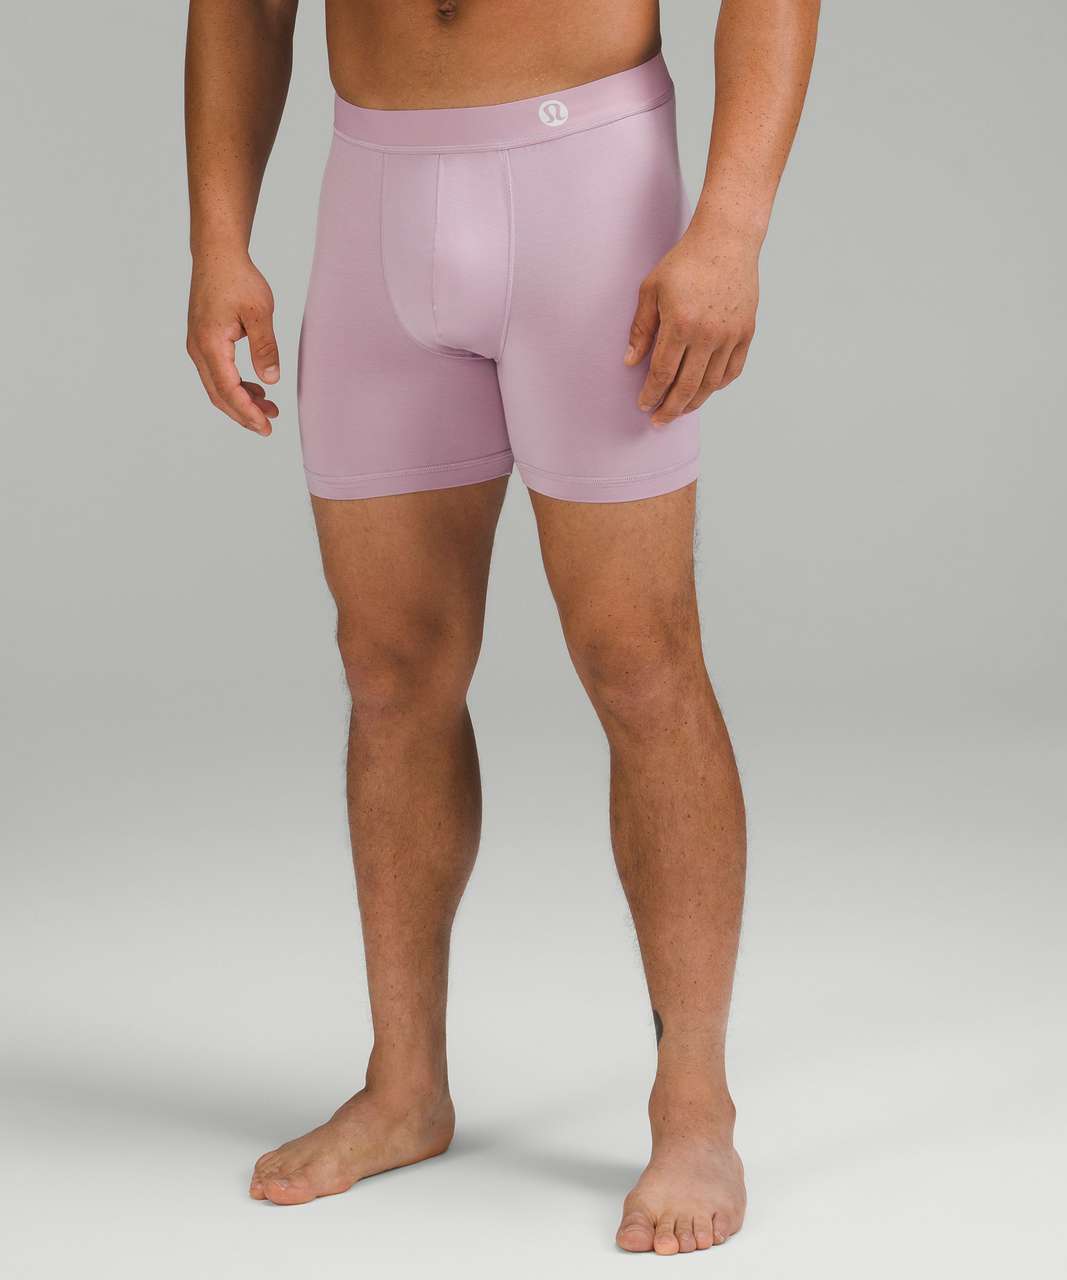 Lululemon Always in Motion Boxer 5" 3 Pack - Dusty Rose / Breeze Blue / Heathered Crest